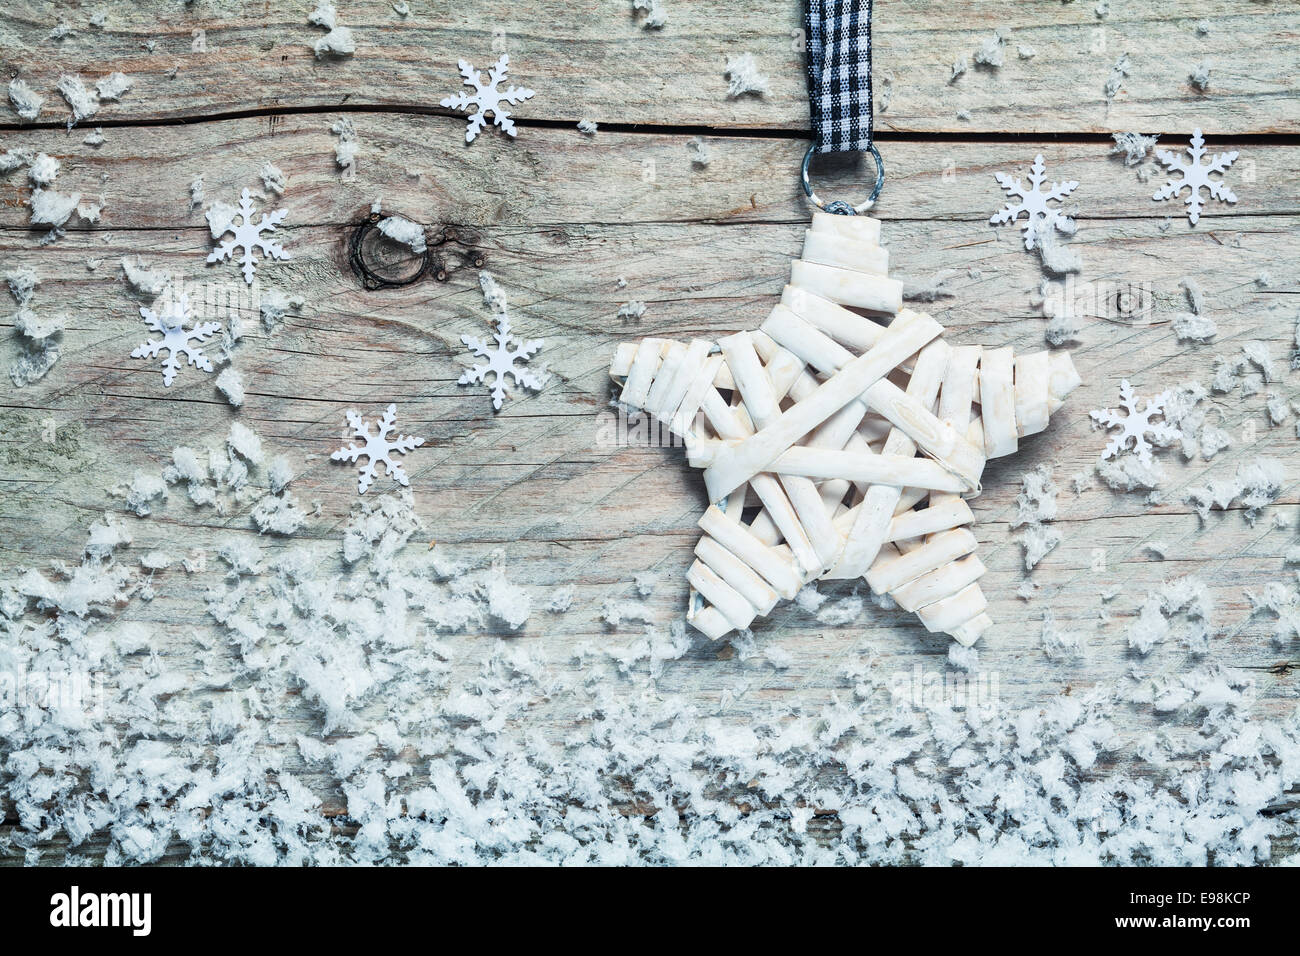 Country style Christmas star wound with white tape hanging on an old wooden background with falling snowflake decorations and winter snow Stock Photo